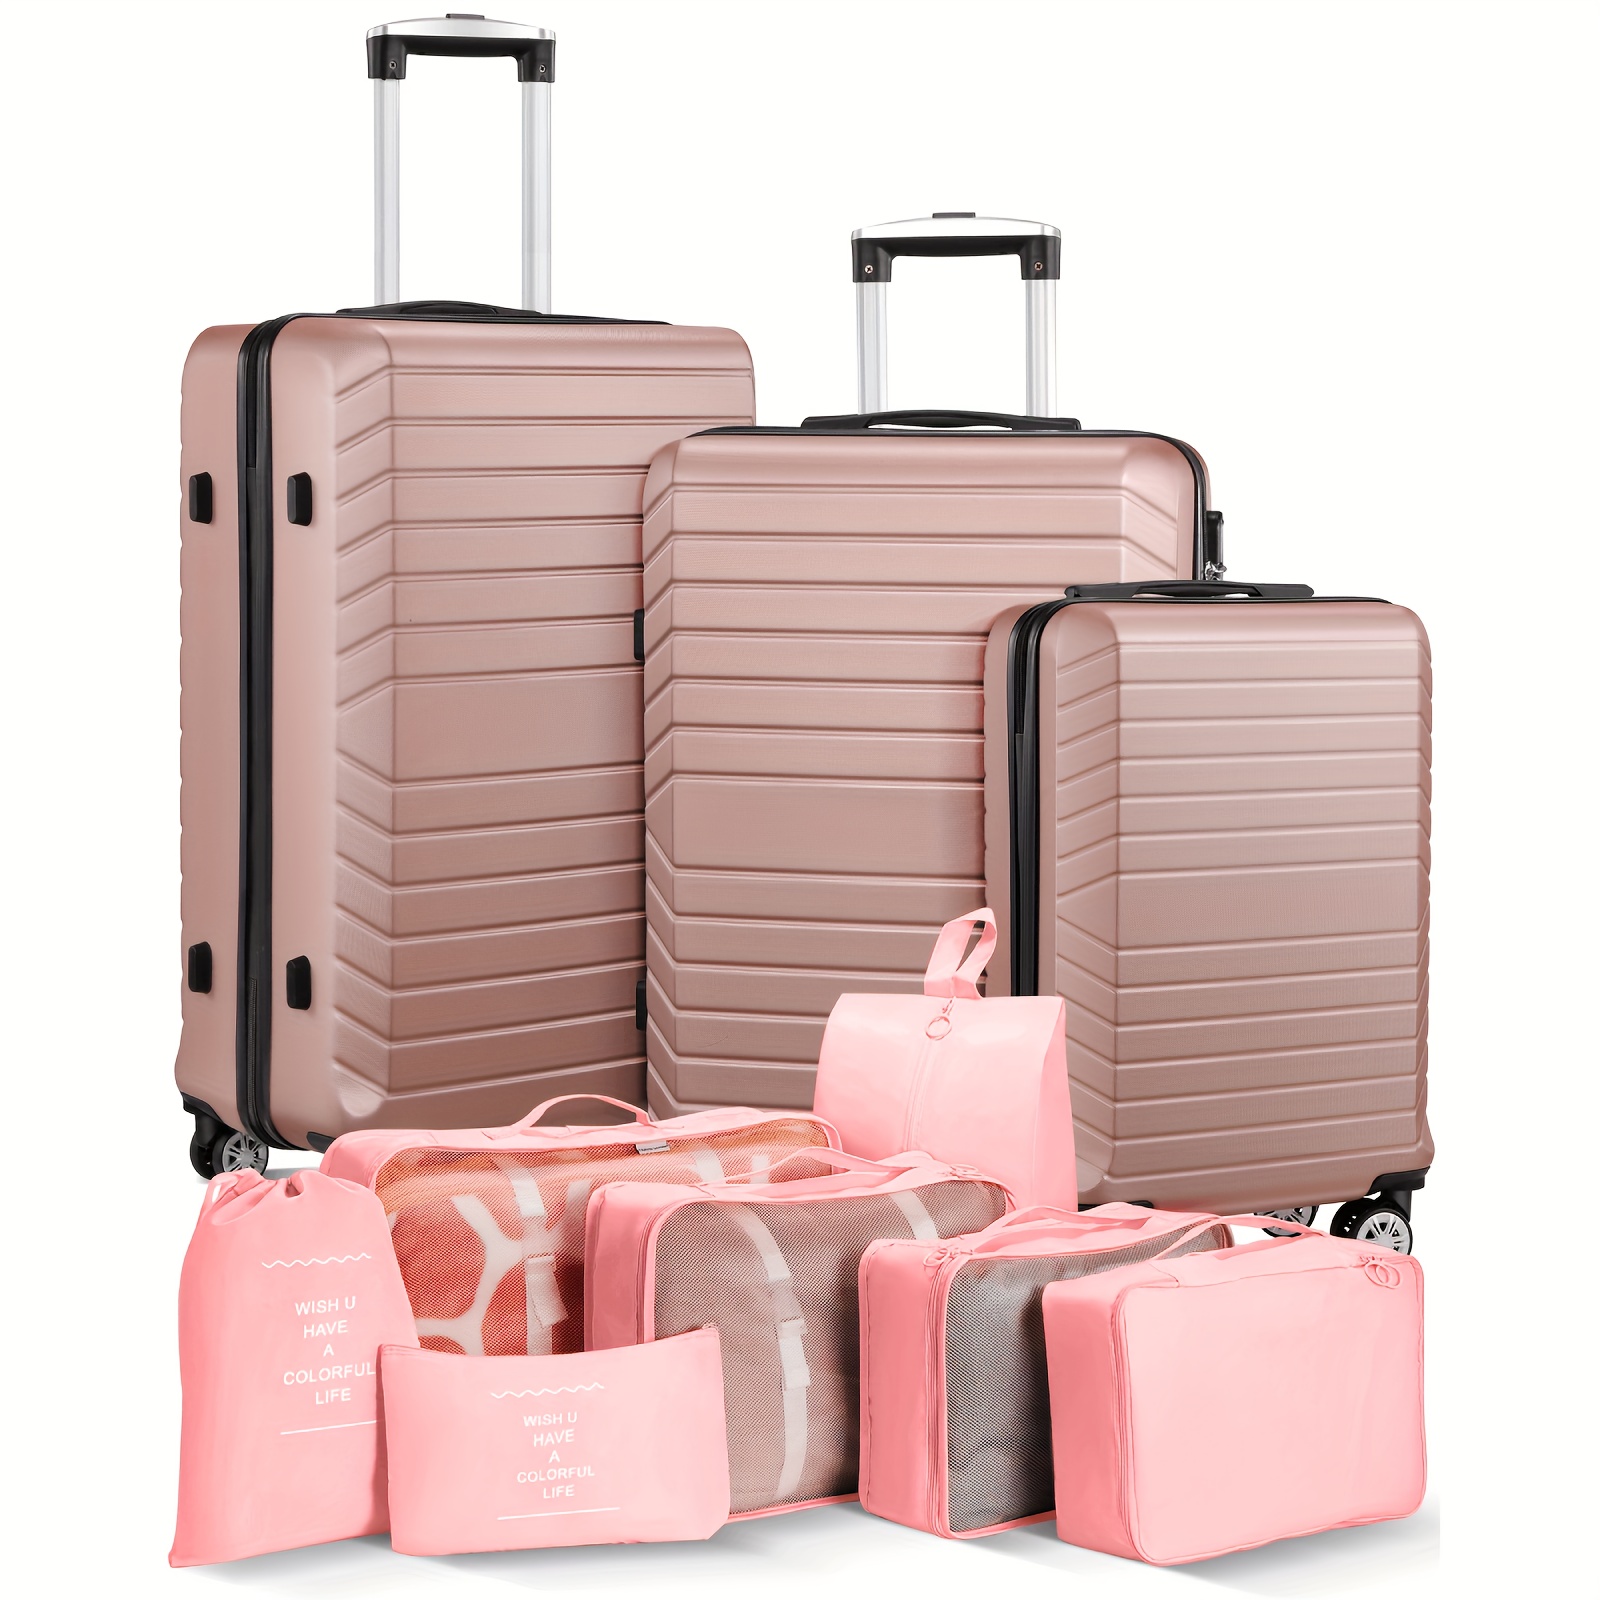 

Luggage Sets 3 Piece, Hardside Abs Suitcase Set With Spinner Wheels, 7 Set Packing Luggage Packing Organizers